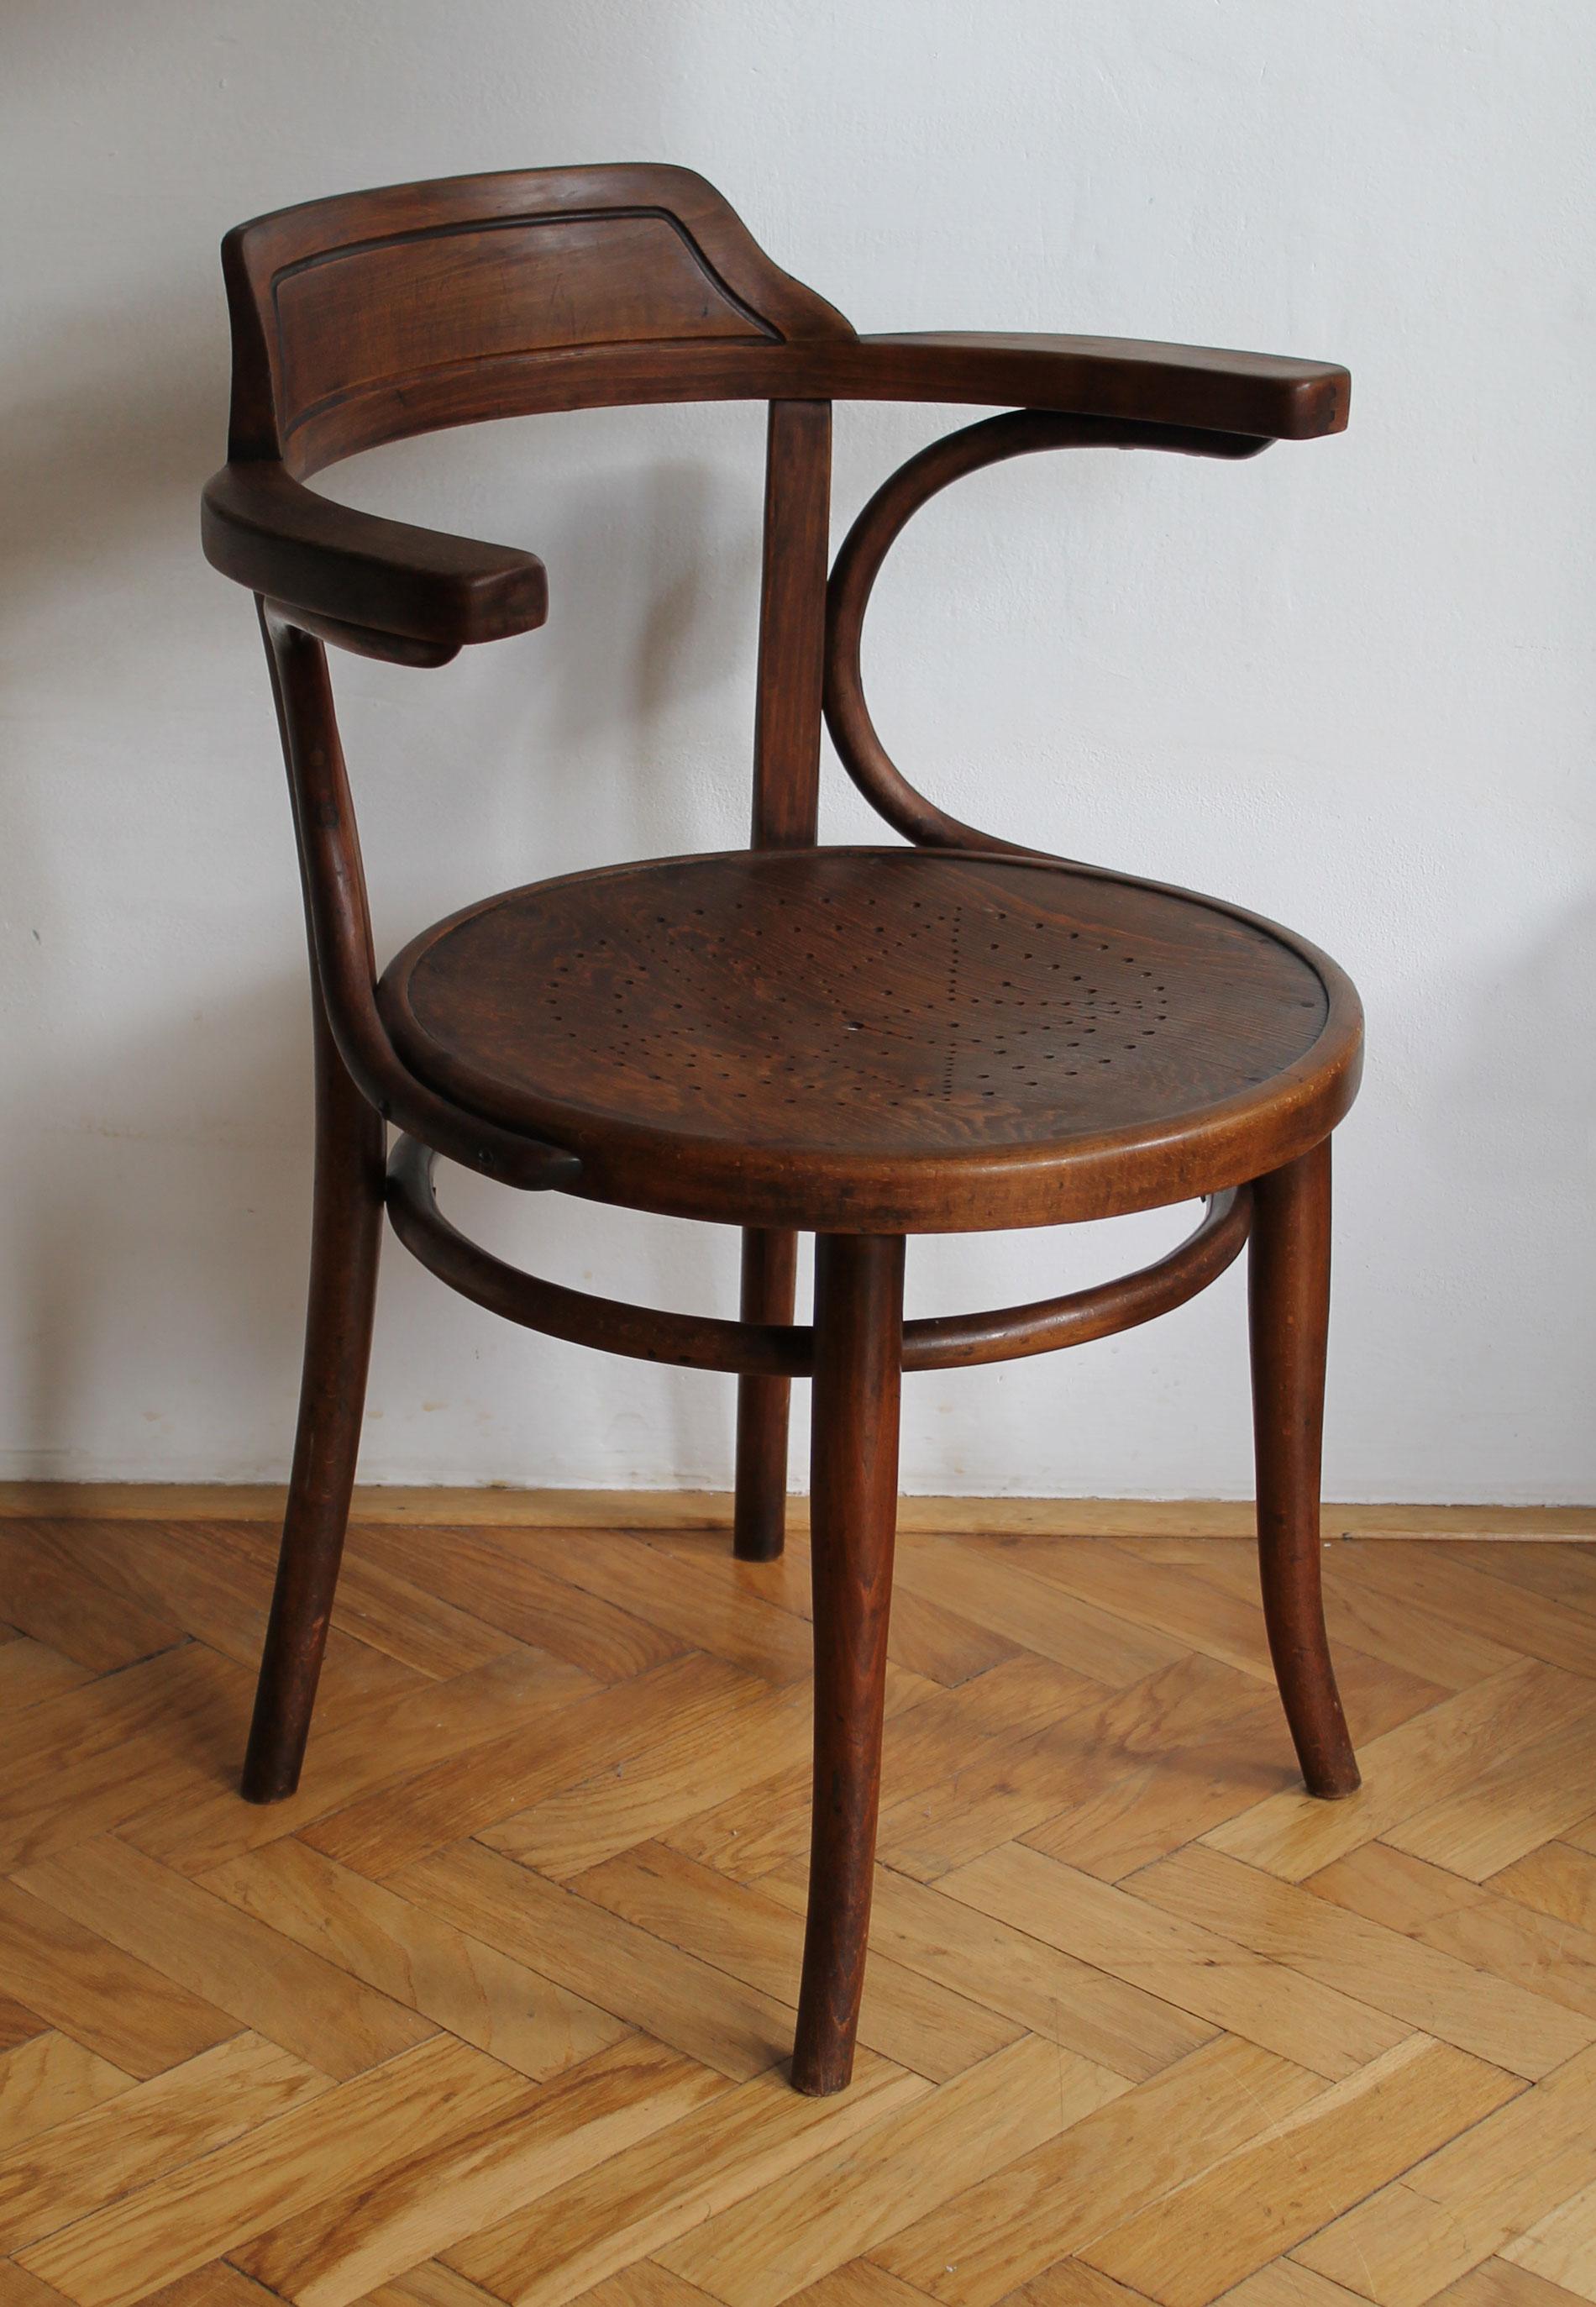 This office/dinning chair was originally designed at the second half of the 19th century, and can be found in the Thonet sales catalogues as model number 3. This particular piece is believed to be produced by the Thonet company in the 1920’s.

The